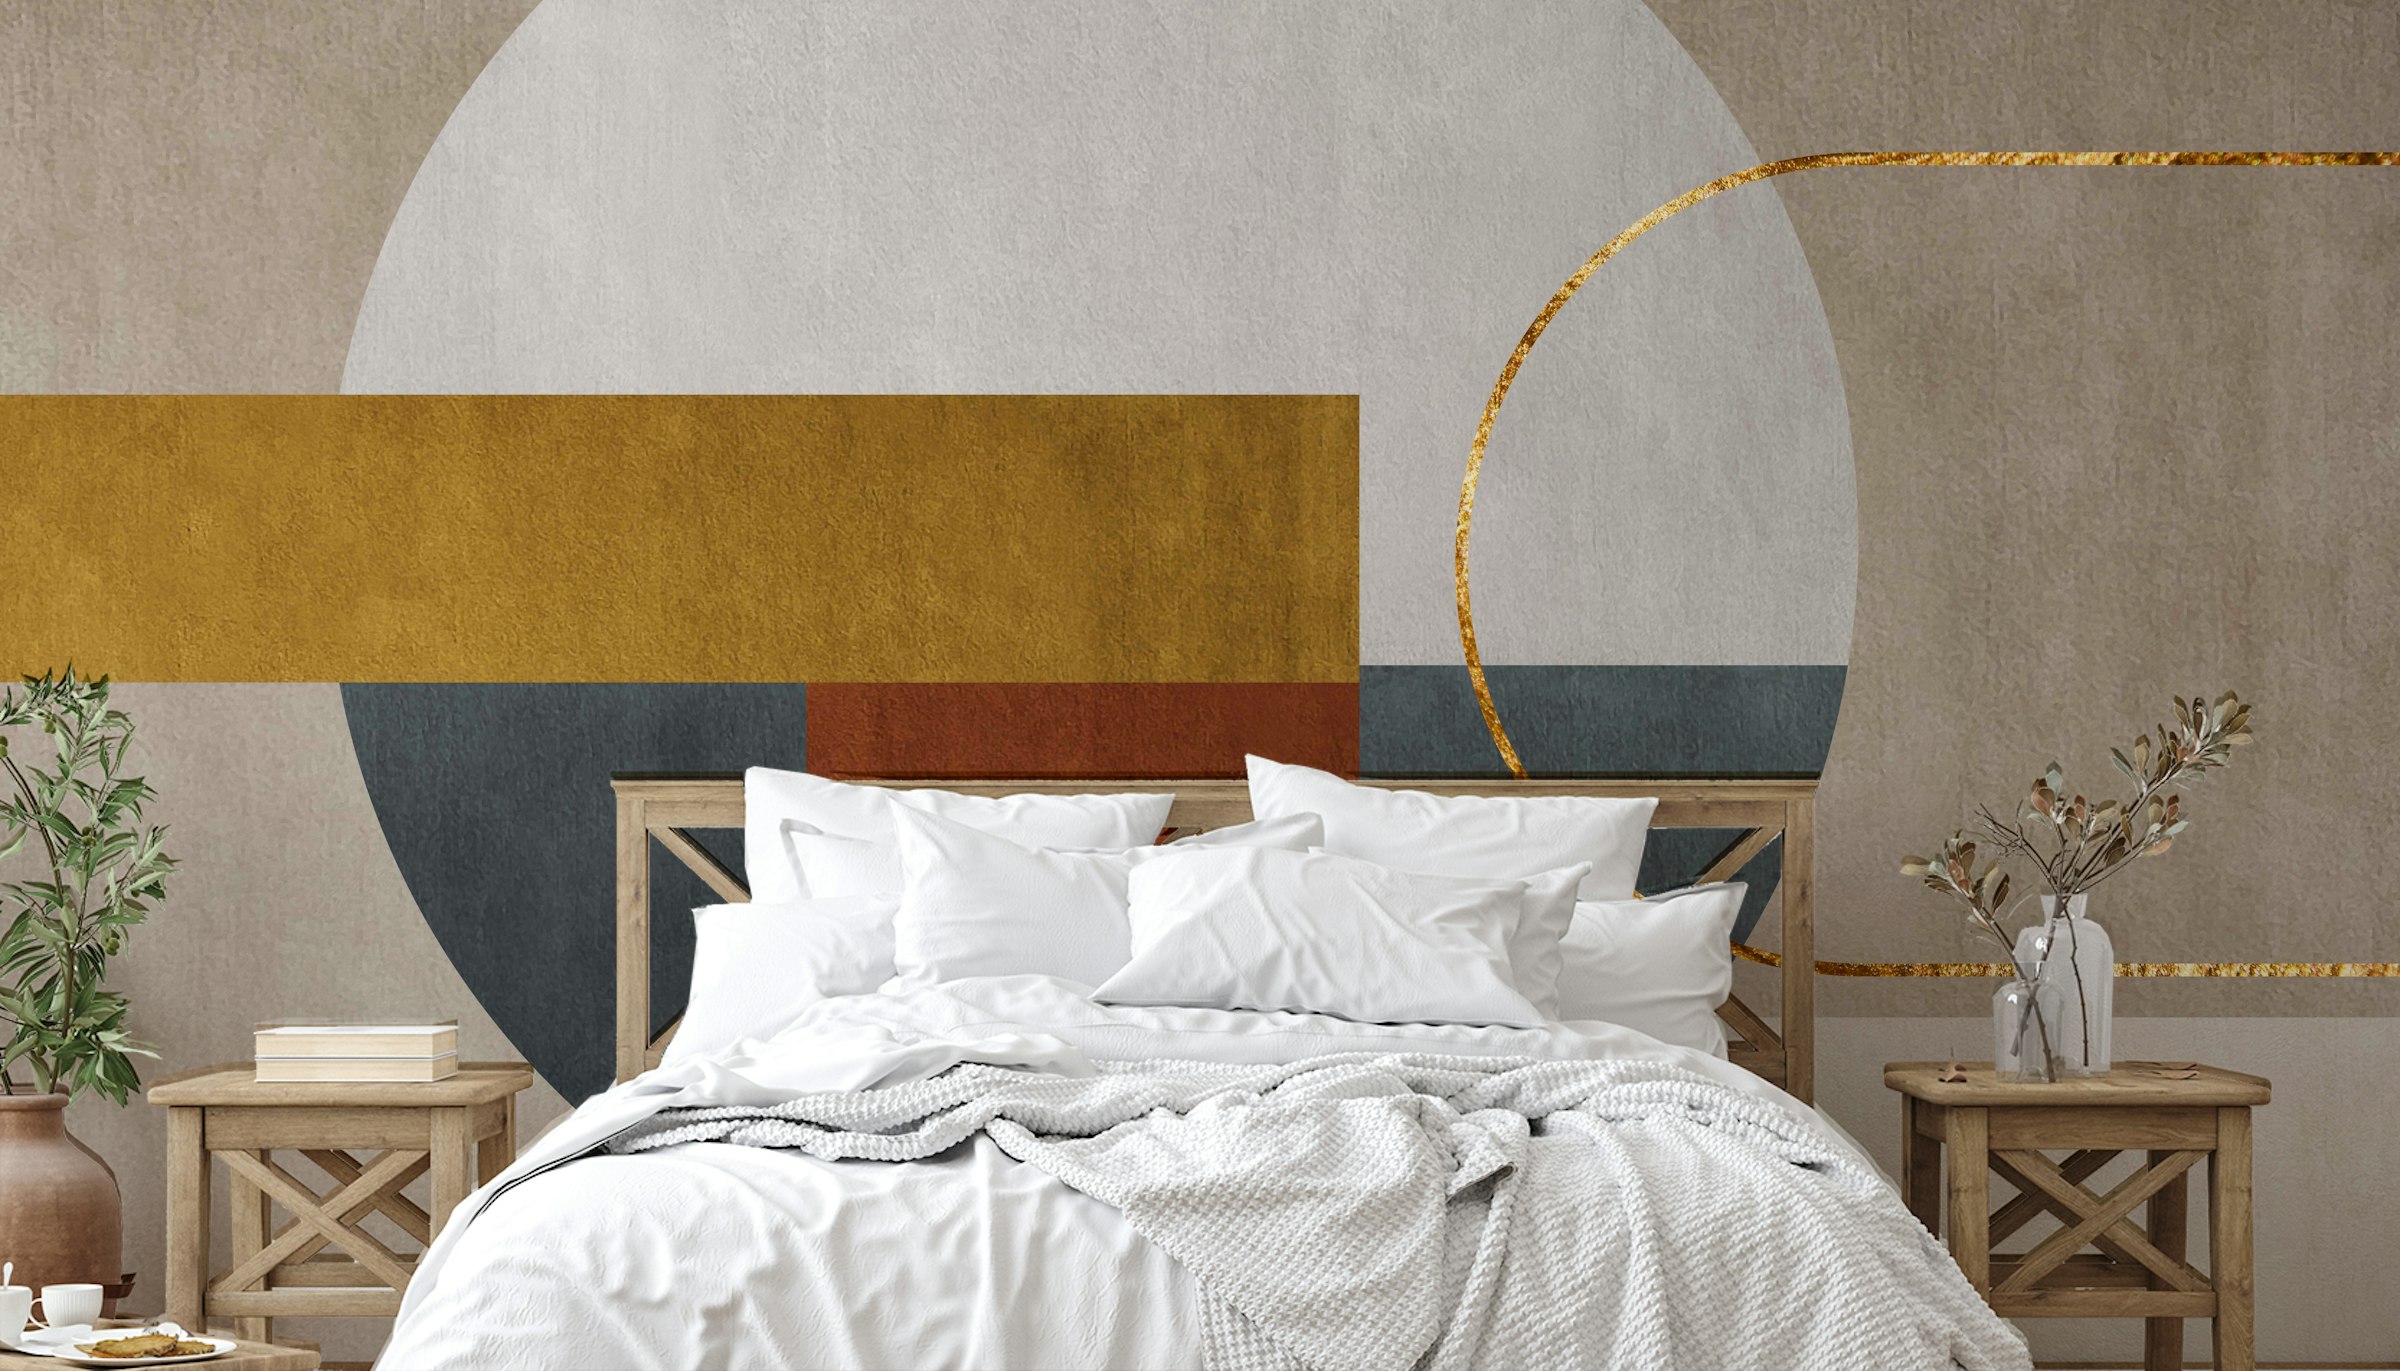 Peel and Stick Elegant Gold Accent Wall Mural